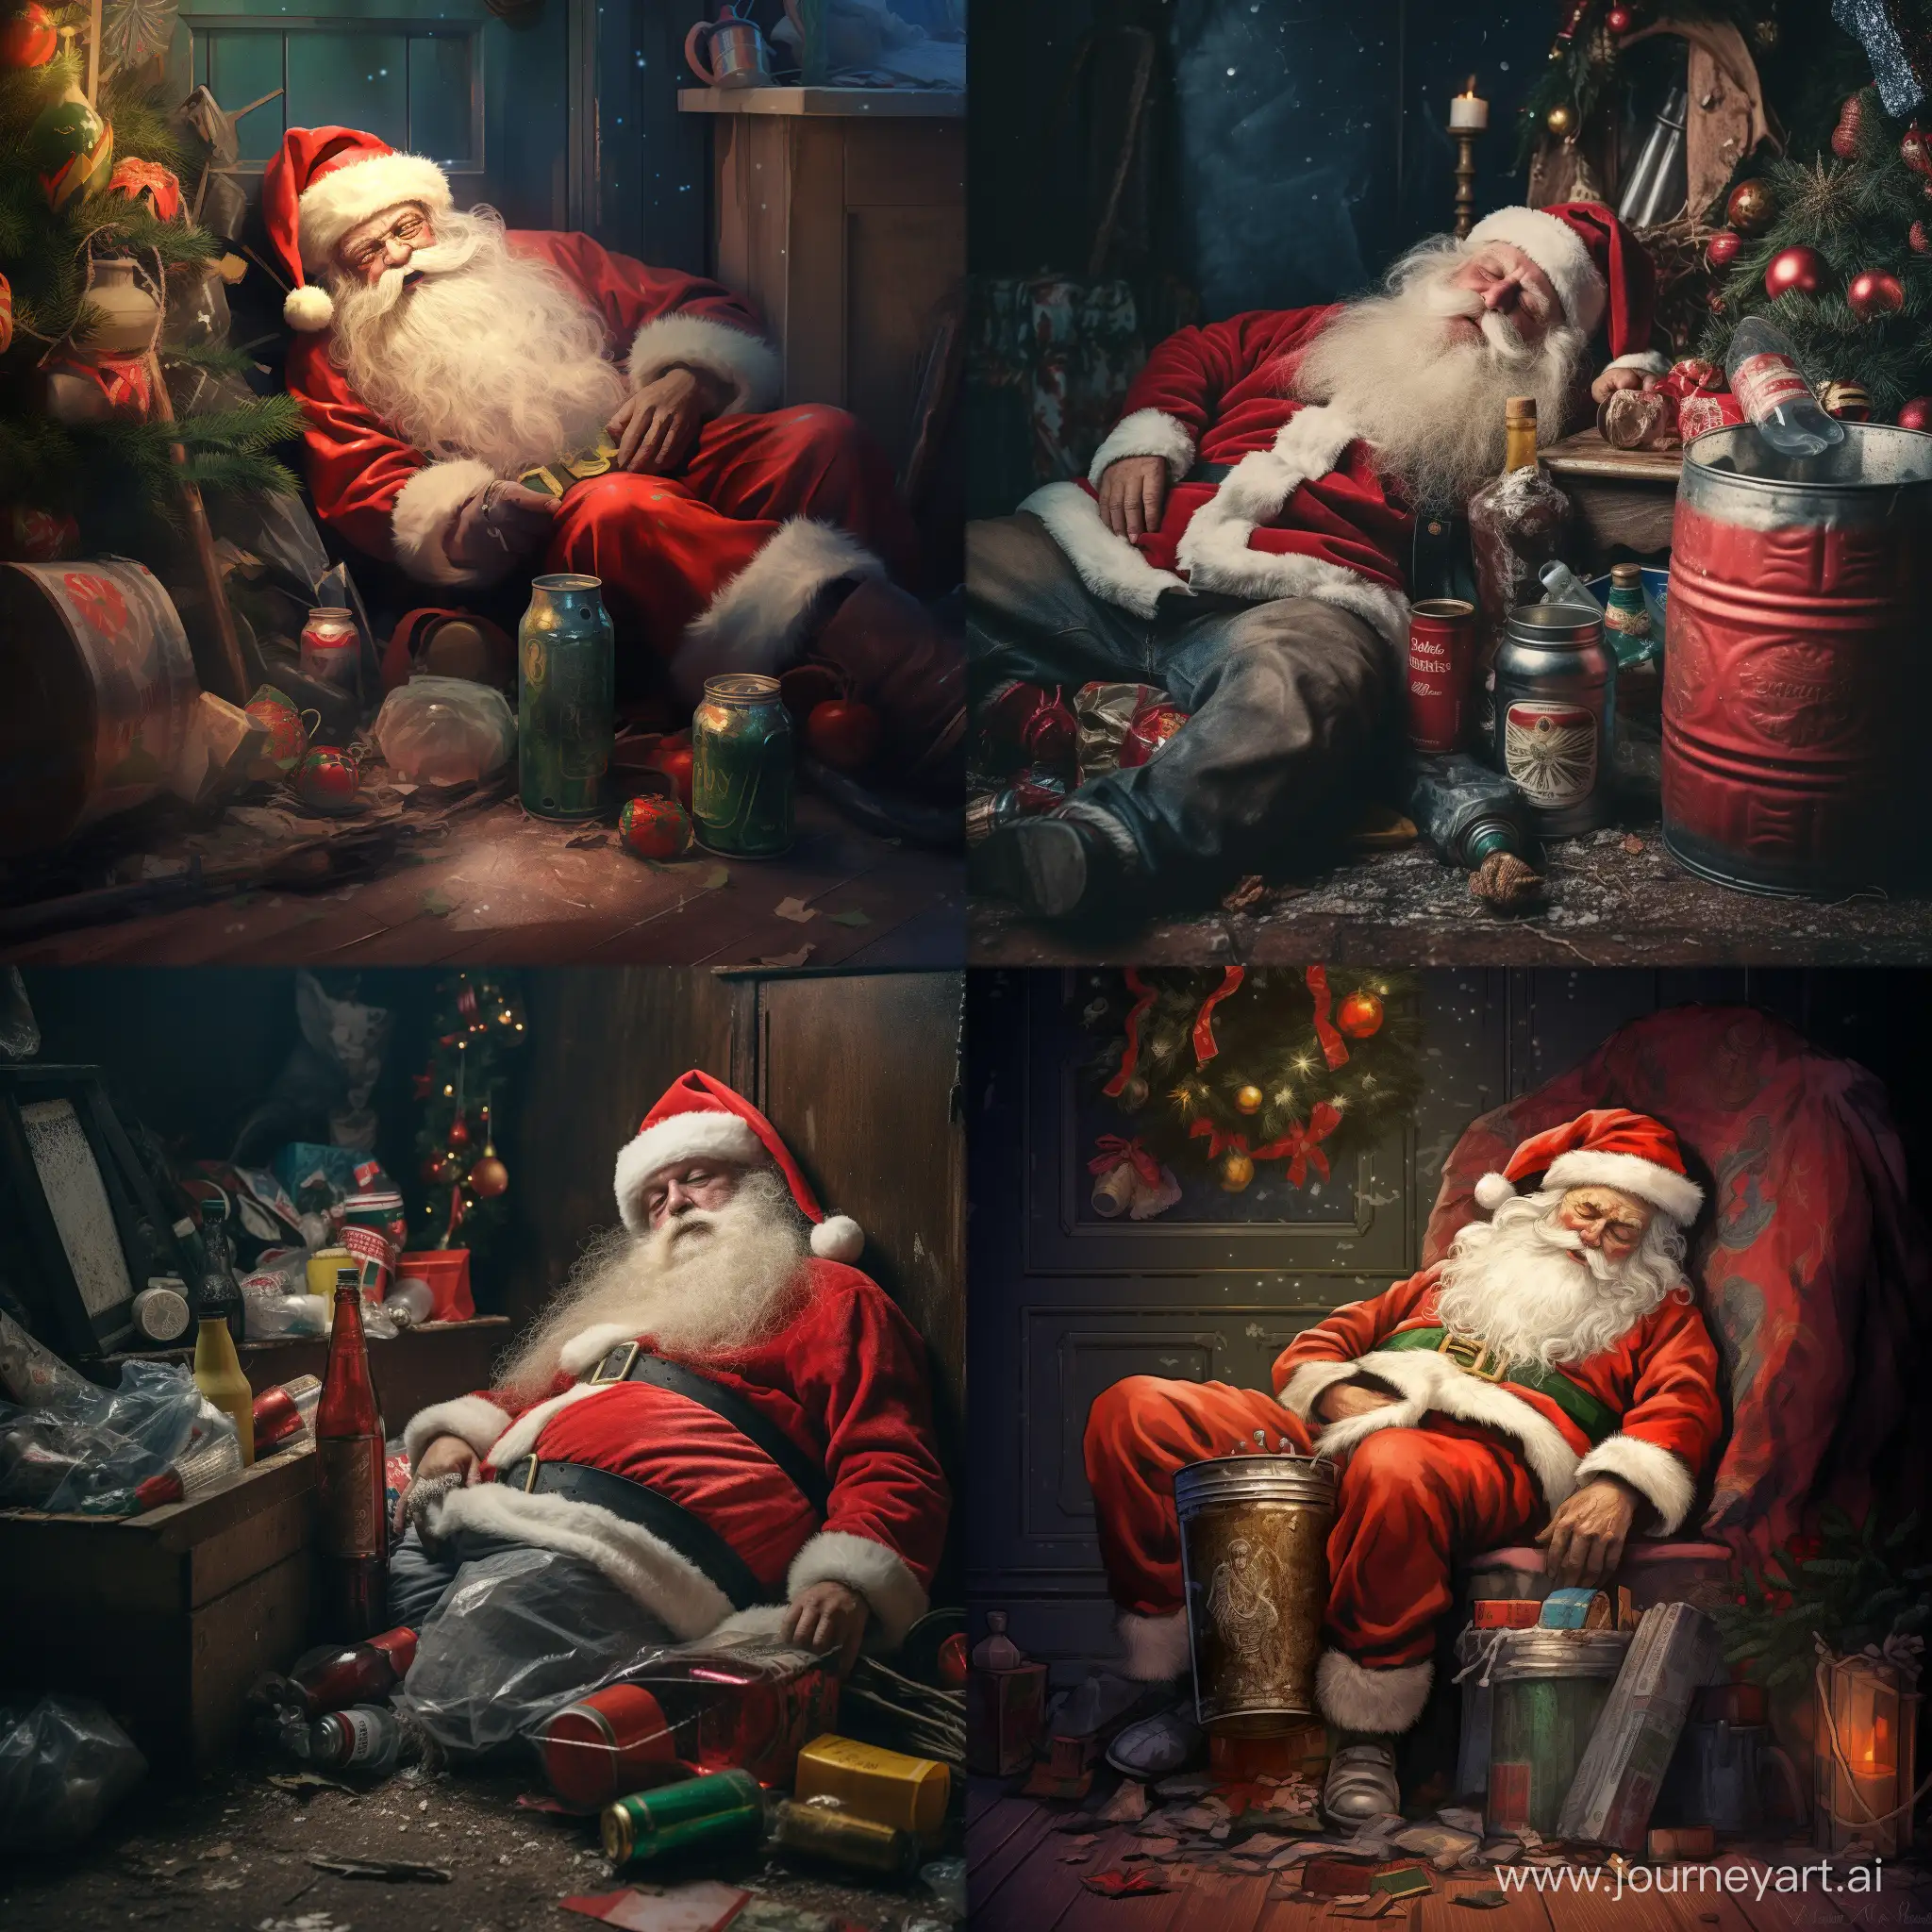 Santa Claus with a bottle of vodka lies under the Christmas tree next to the trash can